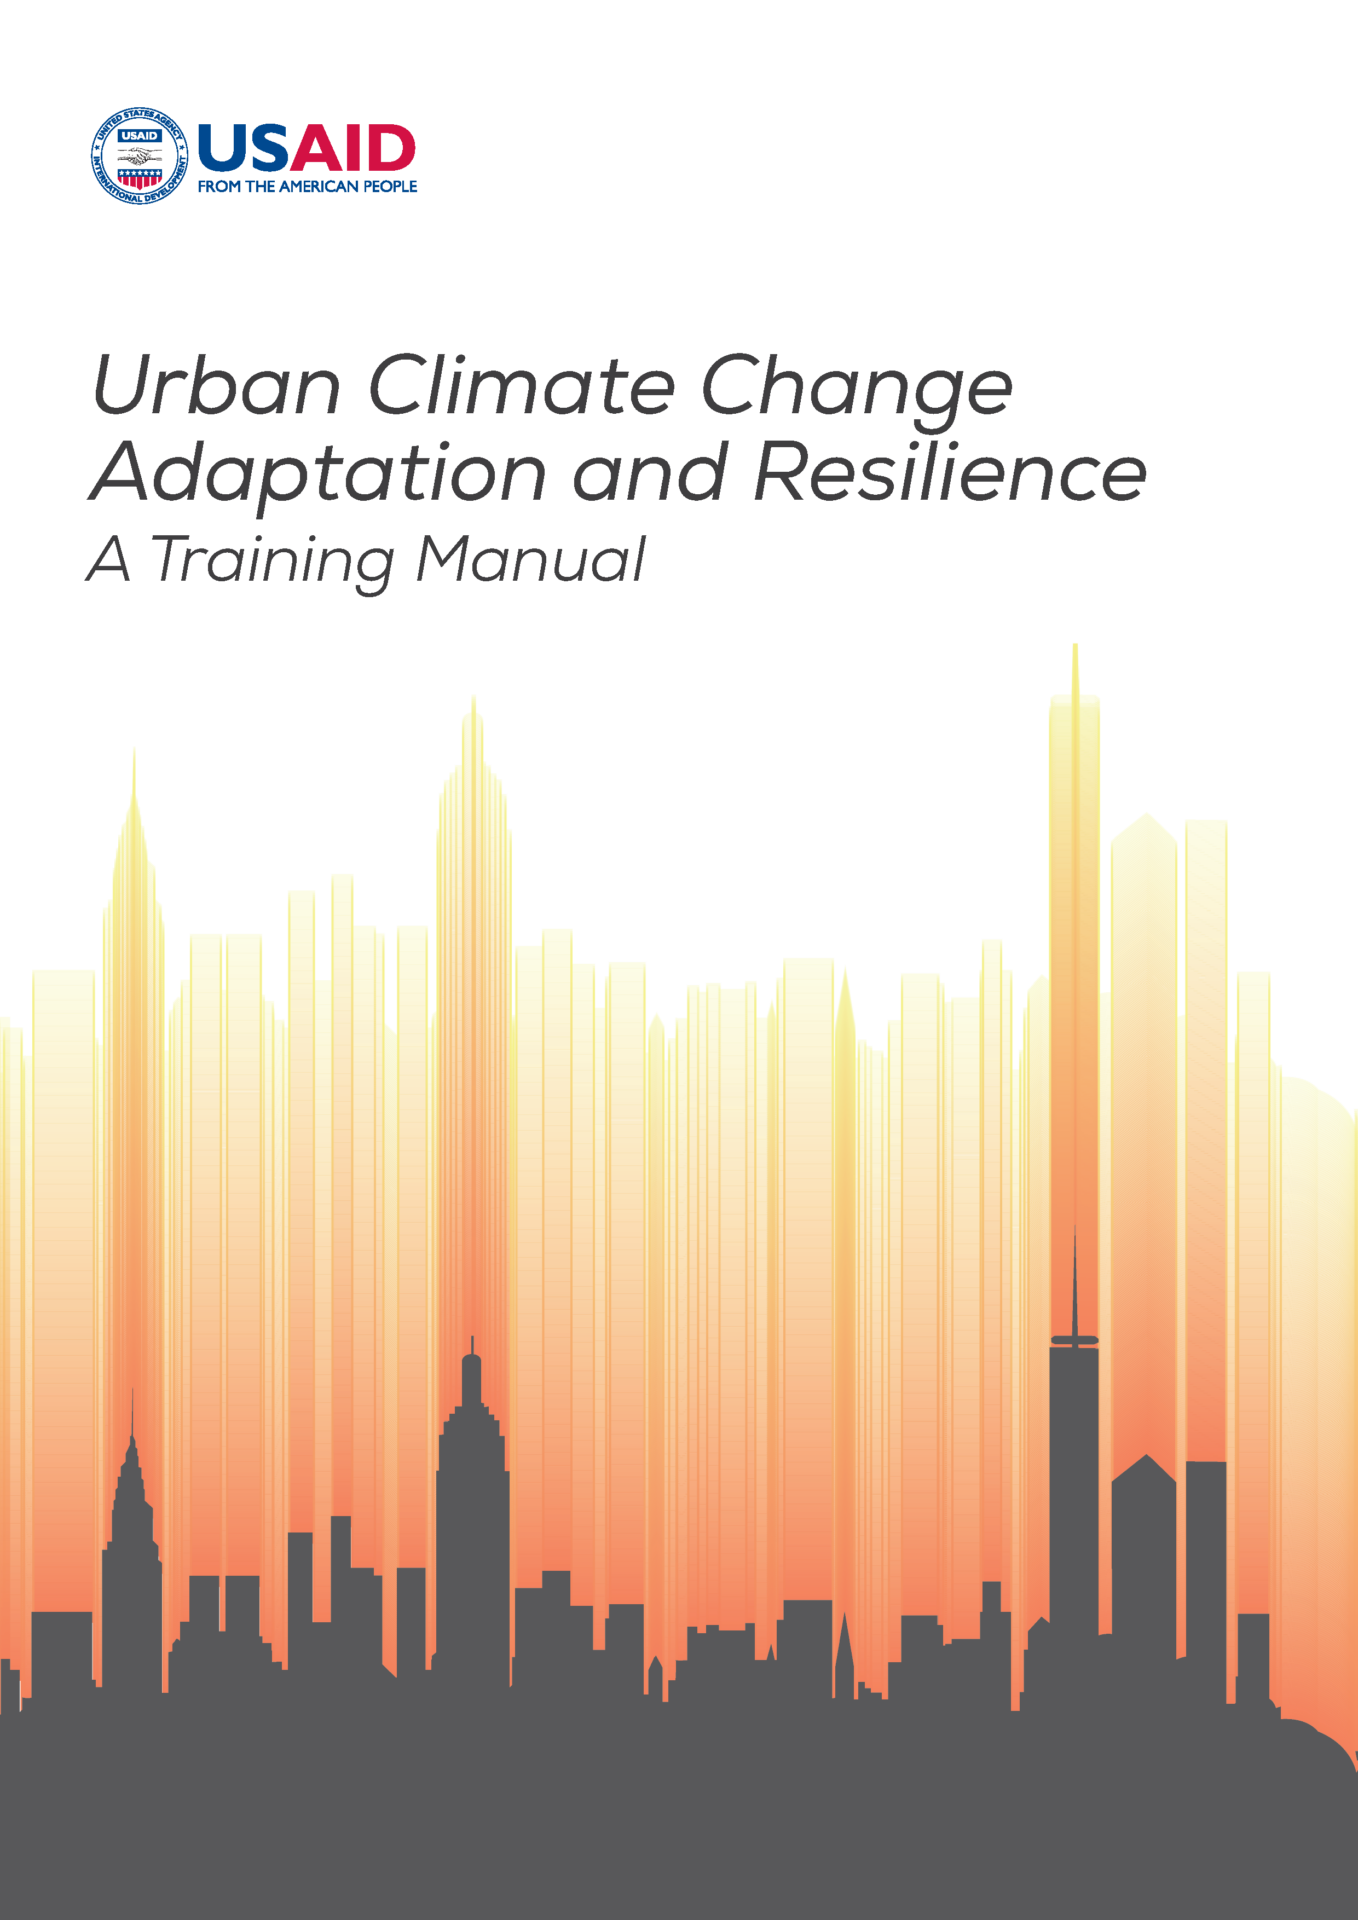 Urban Climate Change Adaptation and Resilience – A Training Manual